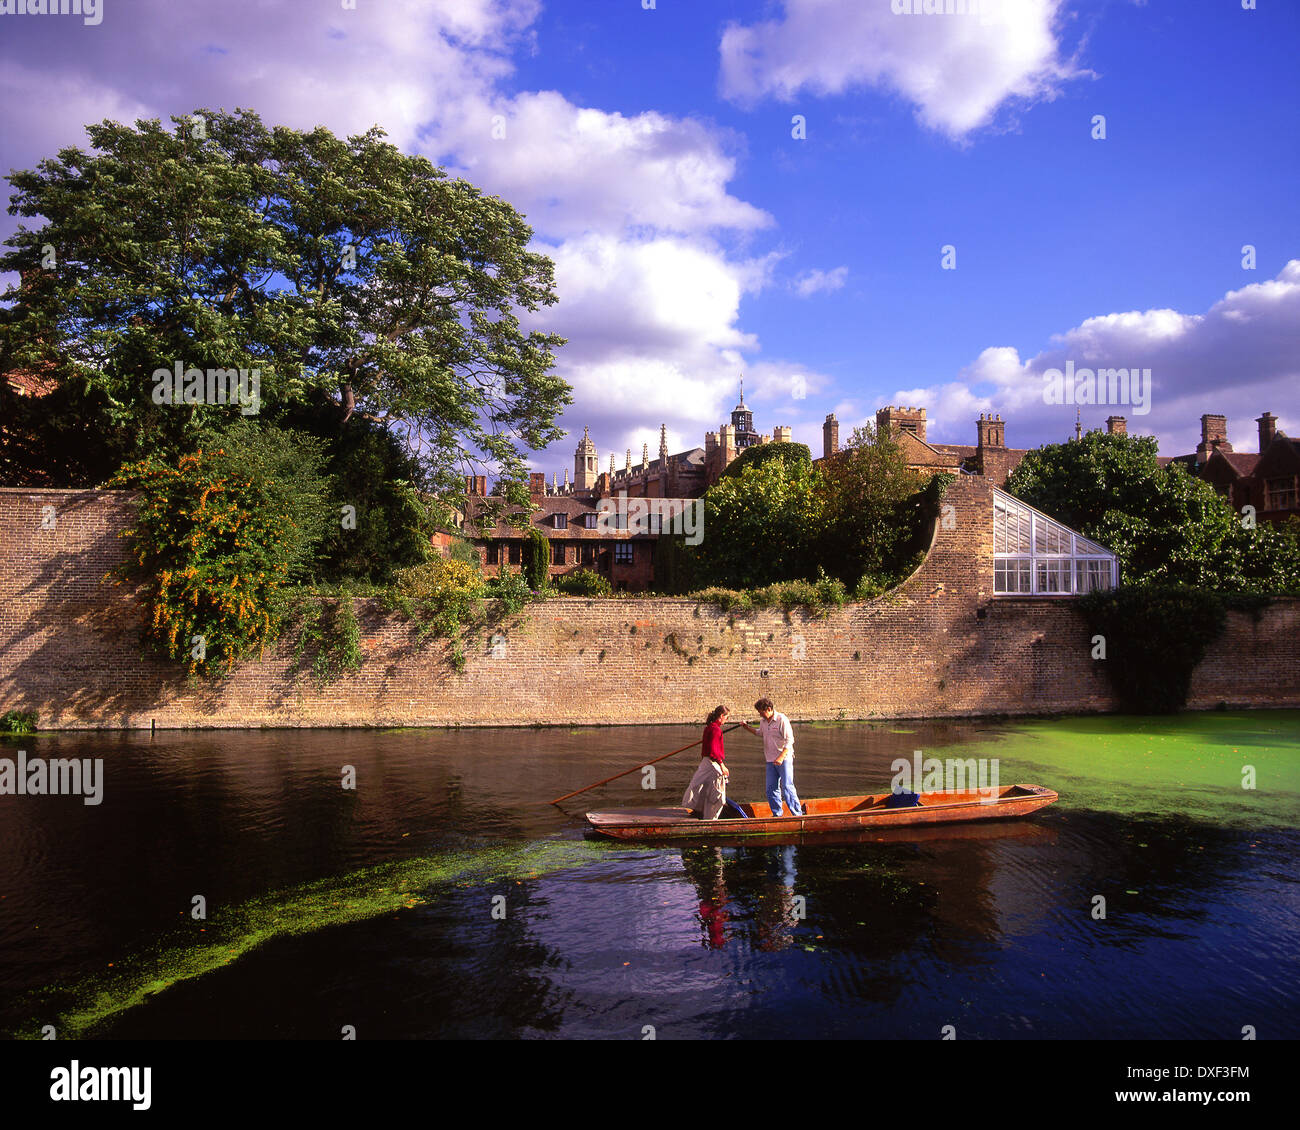 COUPLE ON A PUNT ON THE RIVER CAM IN CAMBRIDGE,ENGLAND Stock Photo